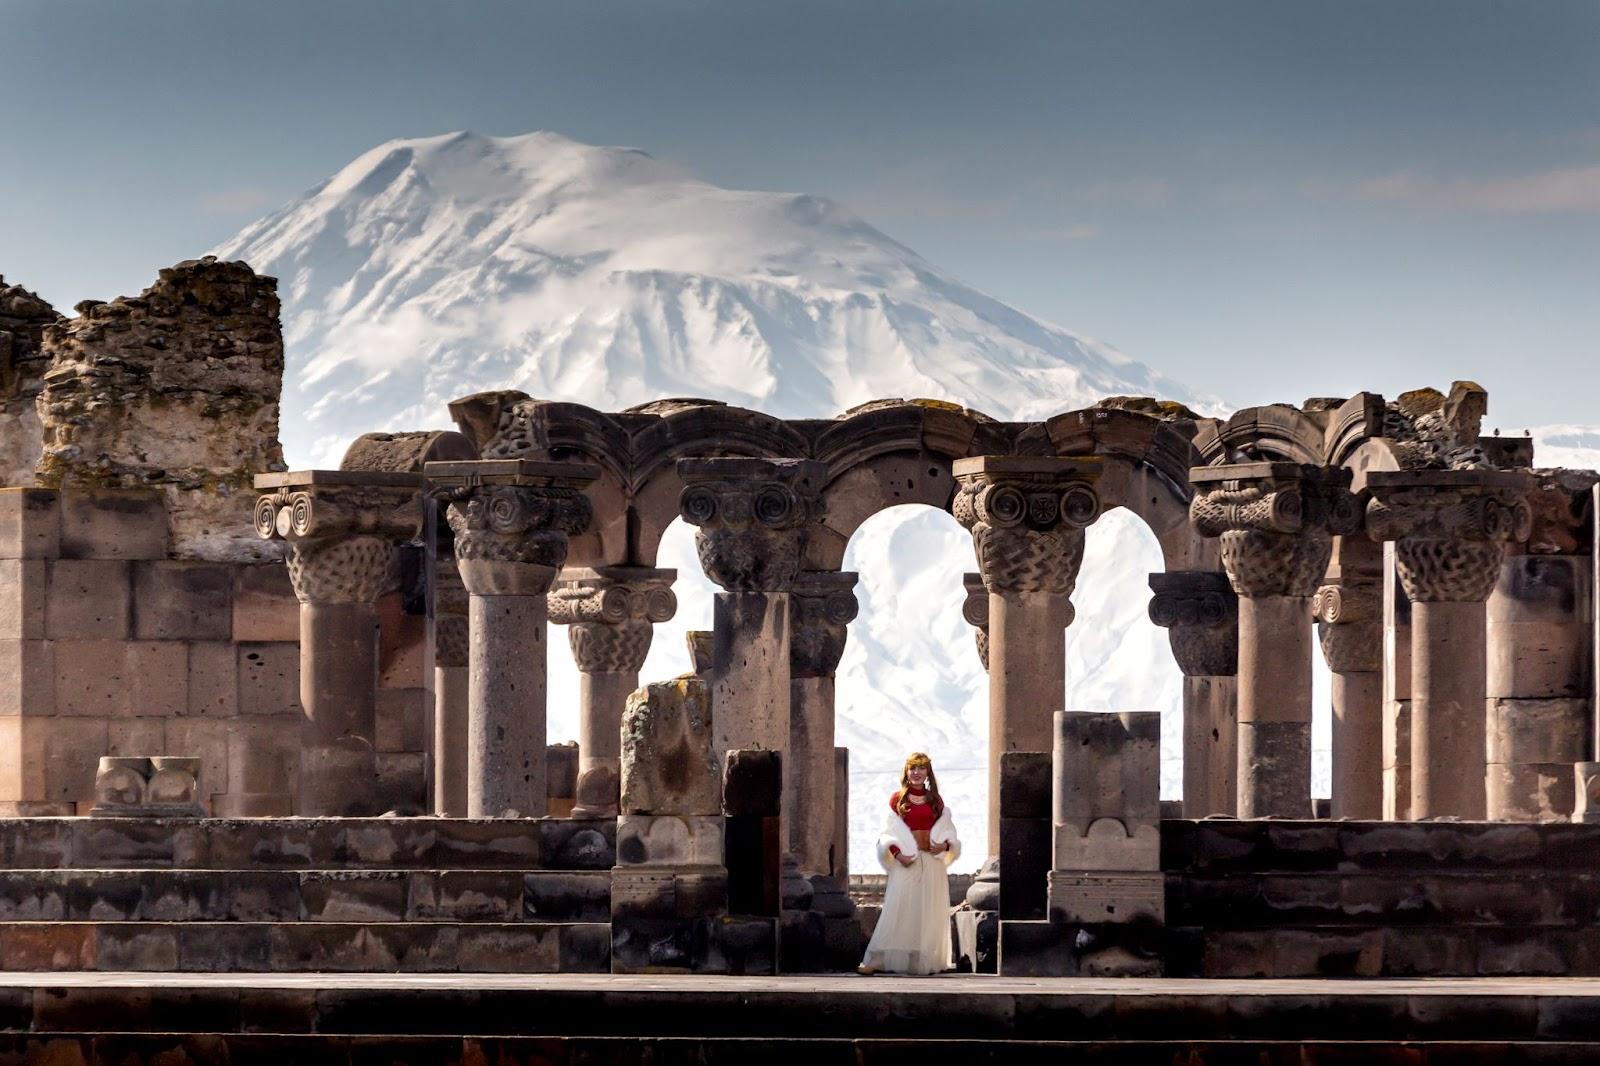 Ruins of the Zvartnos temple in Yerevan, Armenia, with Mt Ararat in the background